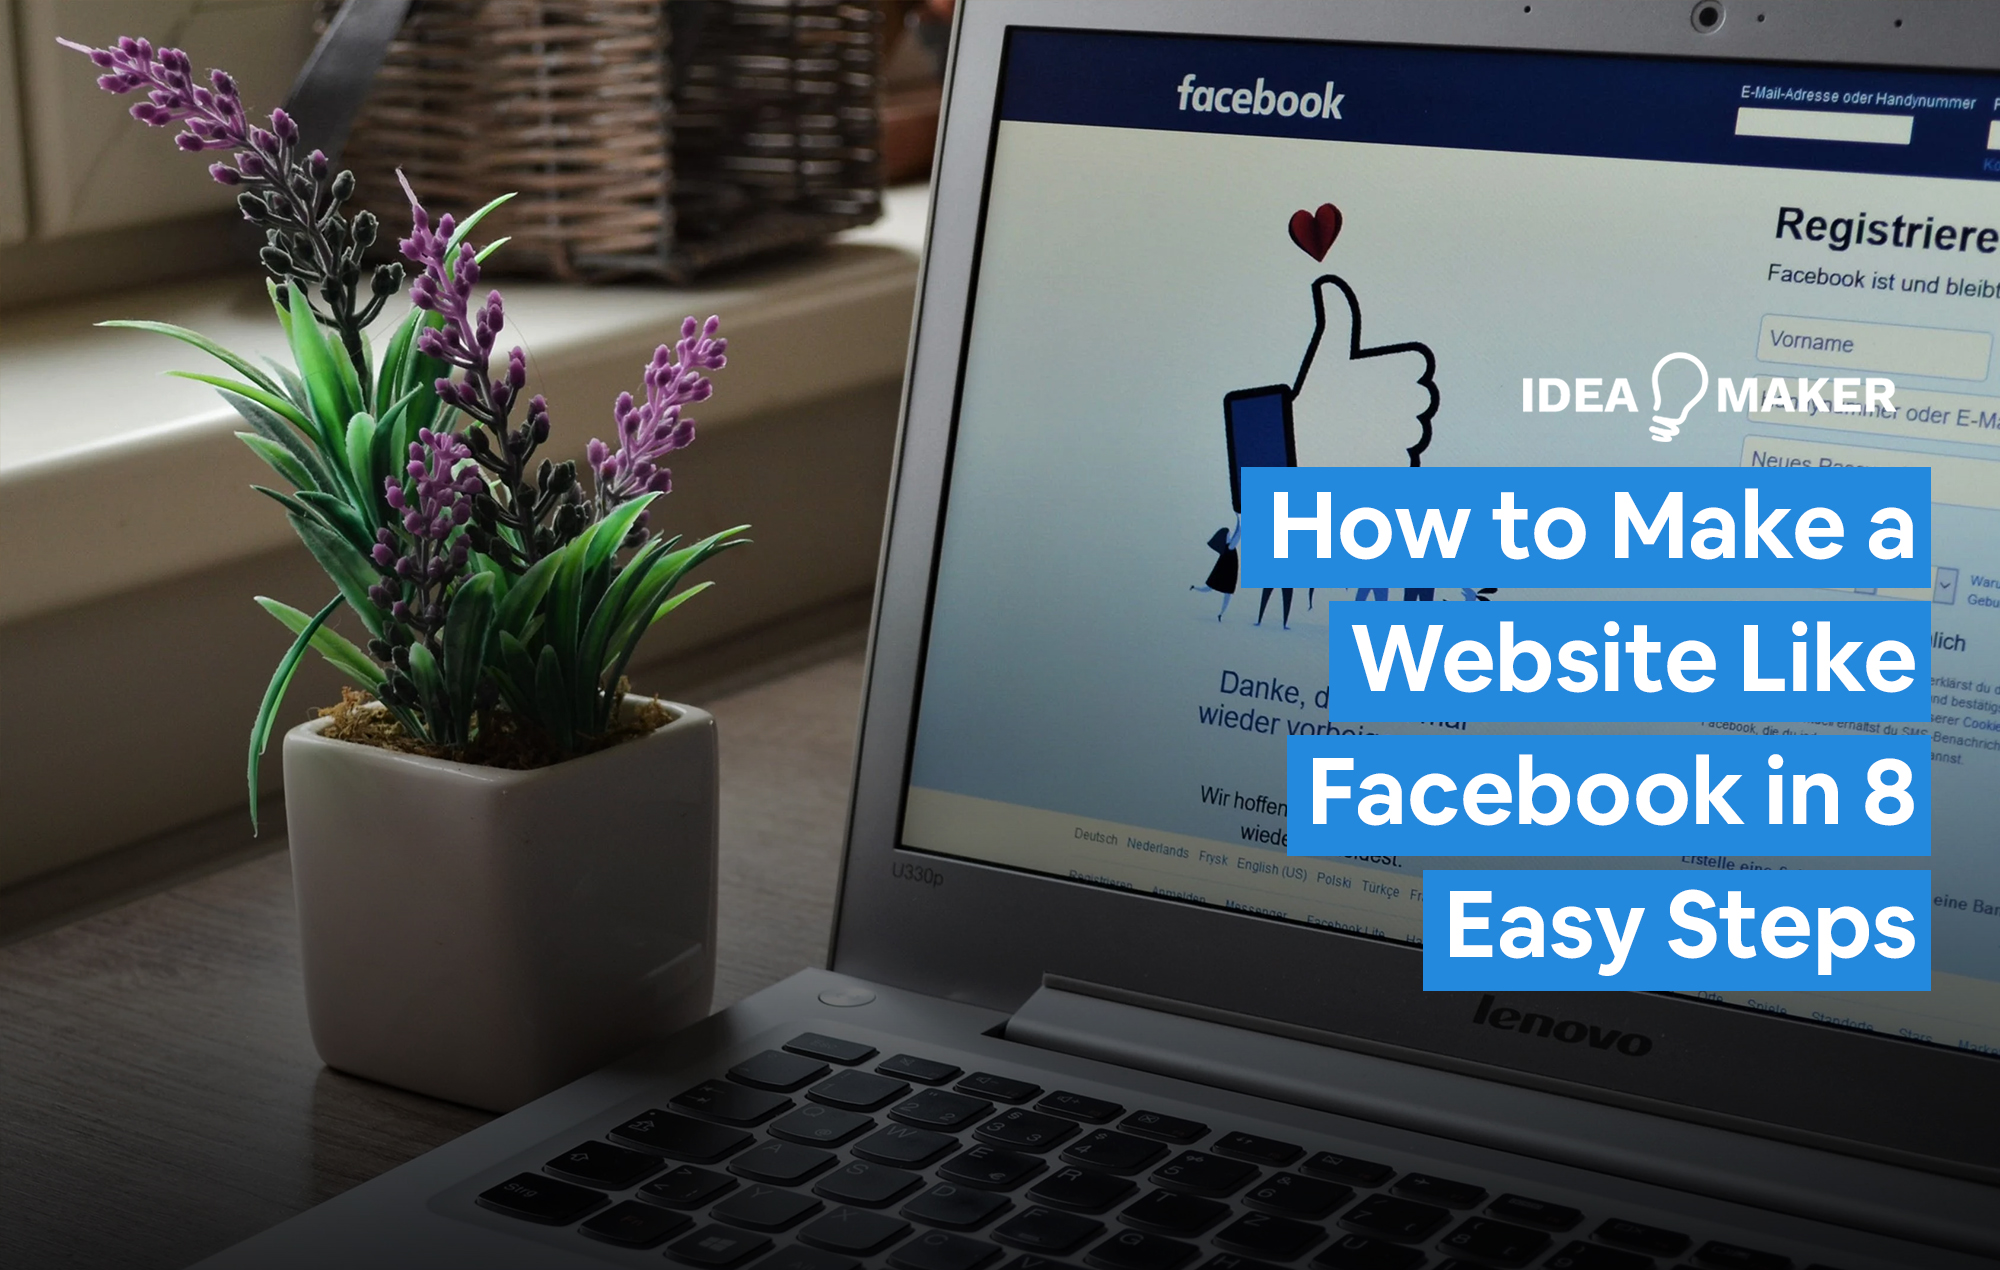 A computer on Facebook text: How to Make a Website Like Facebook in 8 Easy Steps